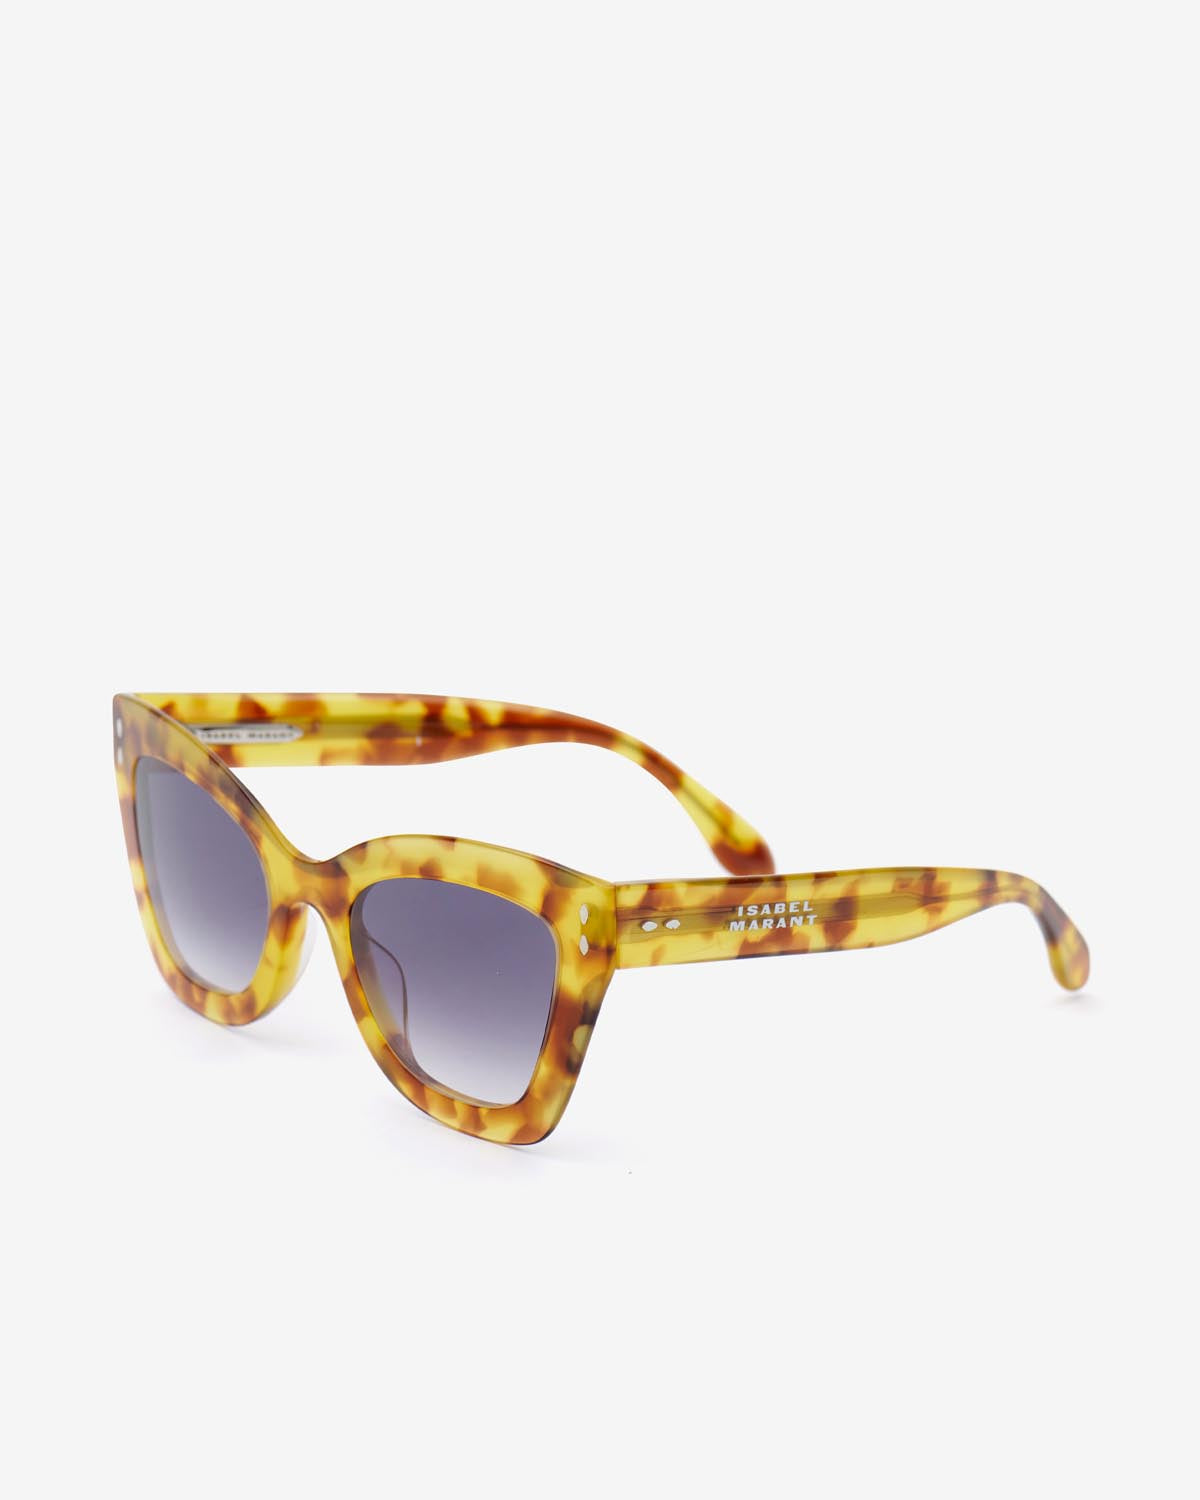 Sunglasses Woman and Man | ISABEL MARANT Official Online Store